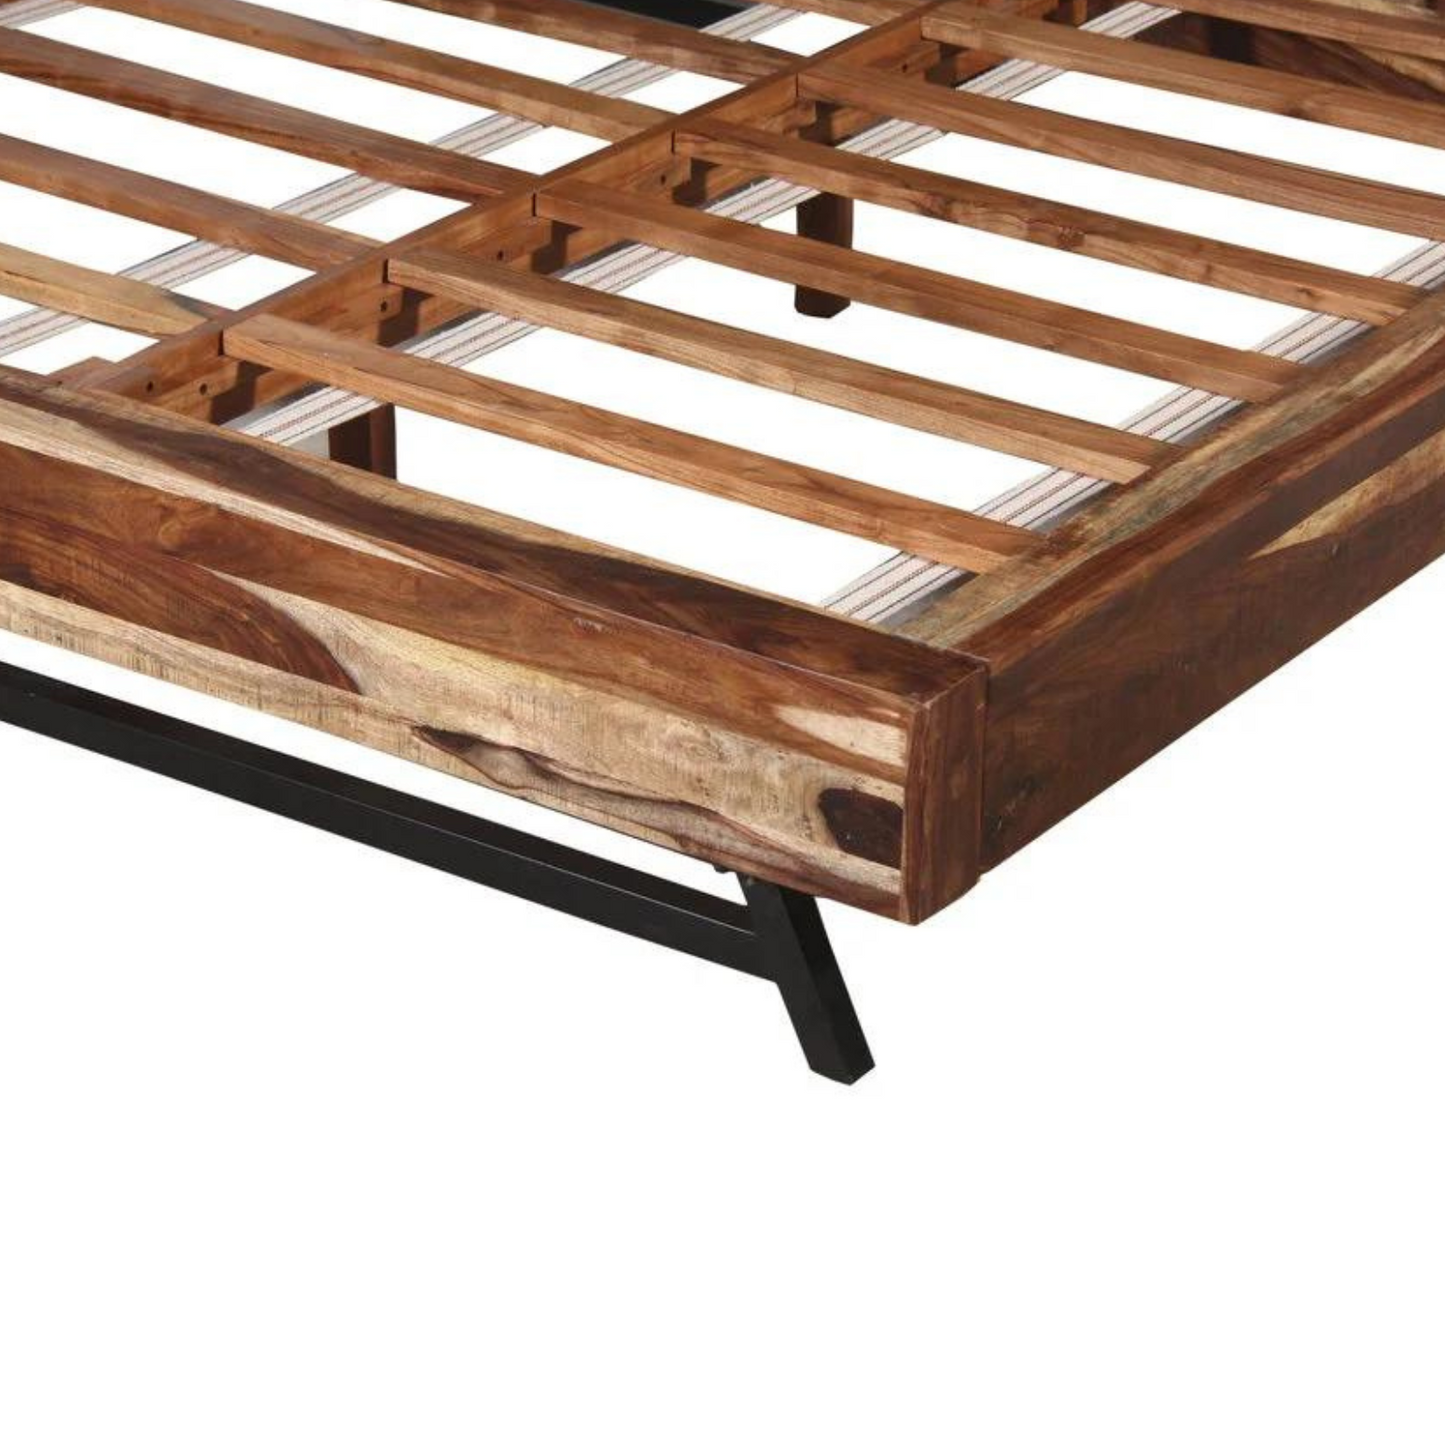 Bed Frame With Tall Panel - Sheesham Wood - More Sizes